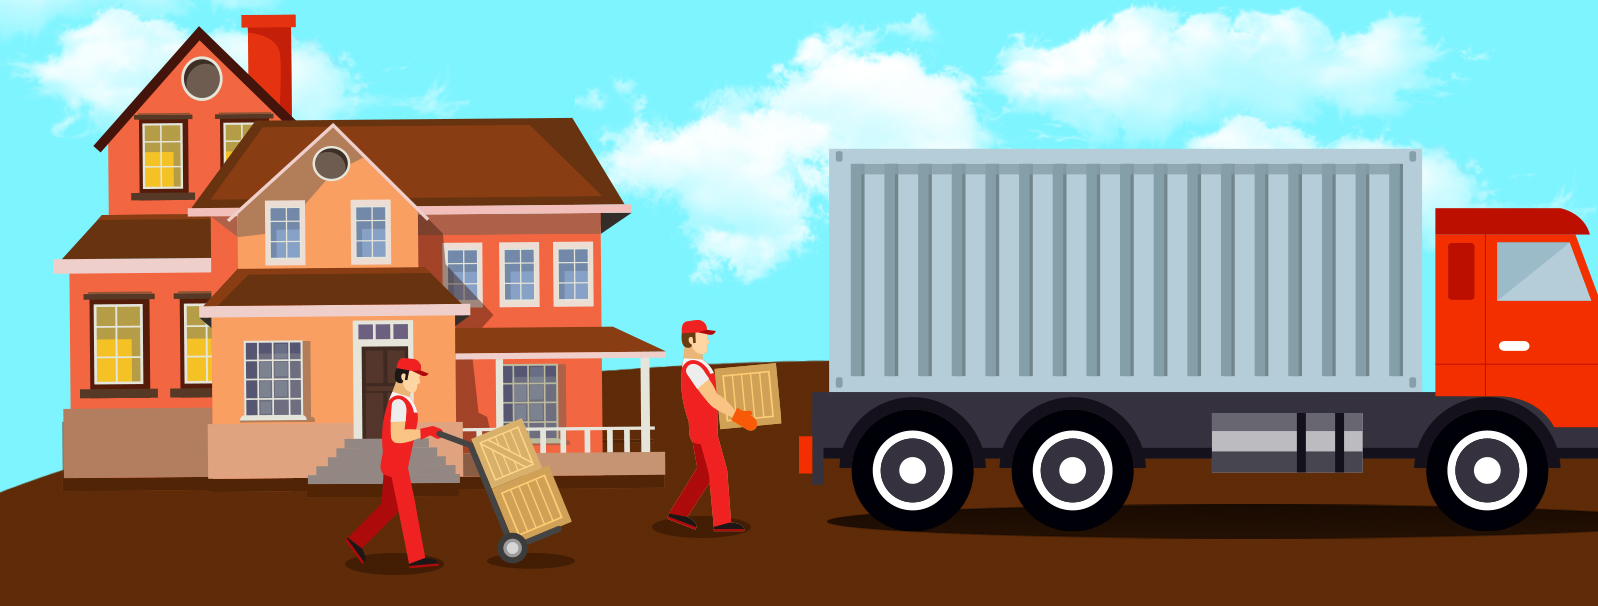 Packers and Movers in Rohtak, Haryana, Packers & Movers in Rohtak, Haryana, Best Packers and Movers in Rohtak, Trusted Packers and Movers in Rohtak, Affordable Packers and Movers in Rohtak, Haryana, Movers and Packers in Rohtak, Haryana